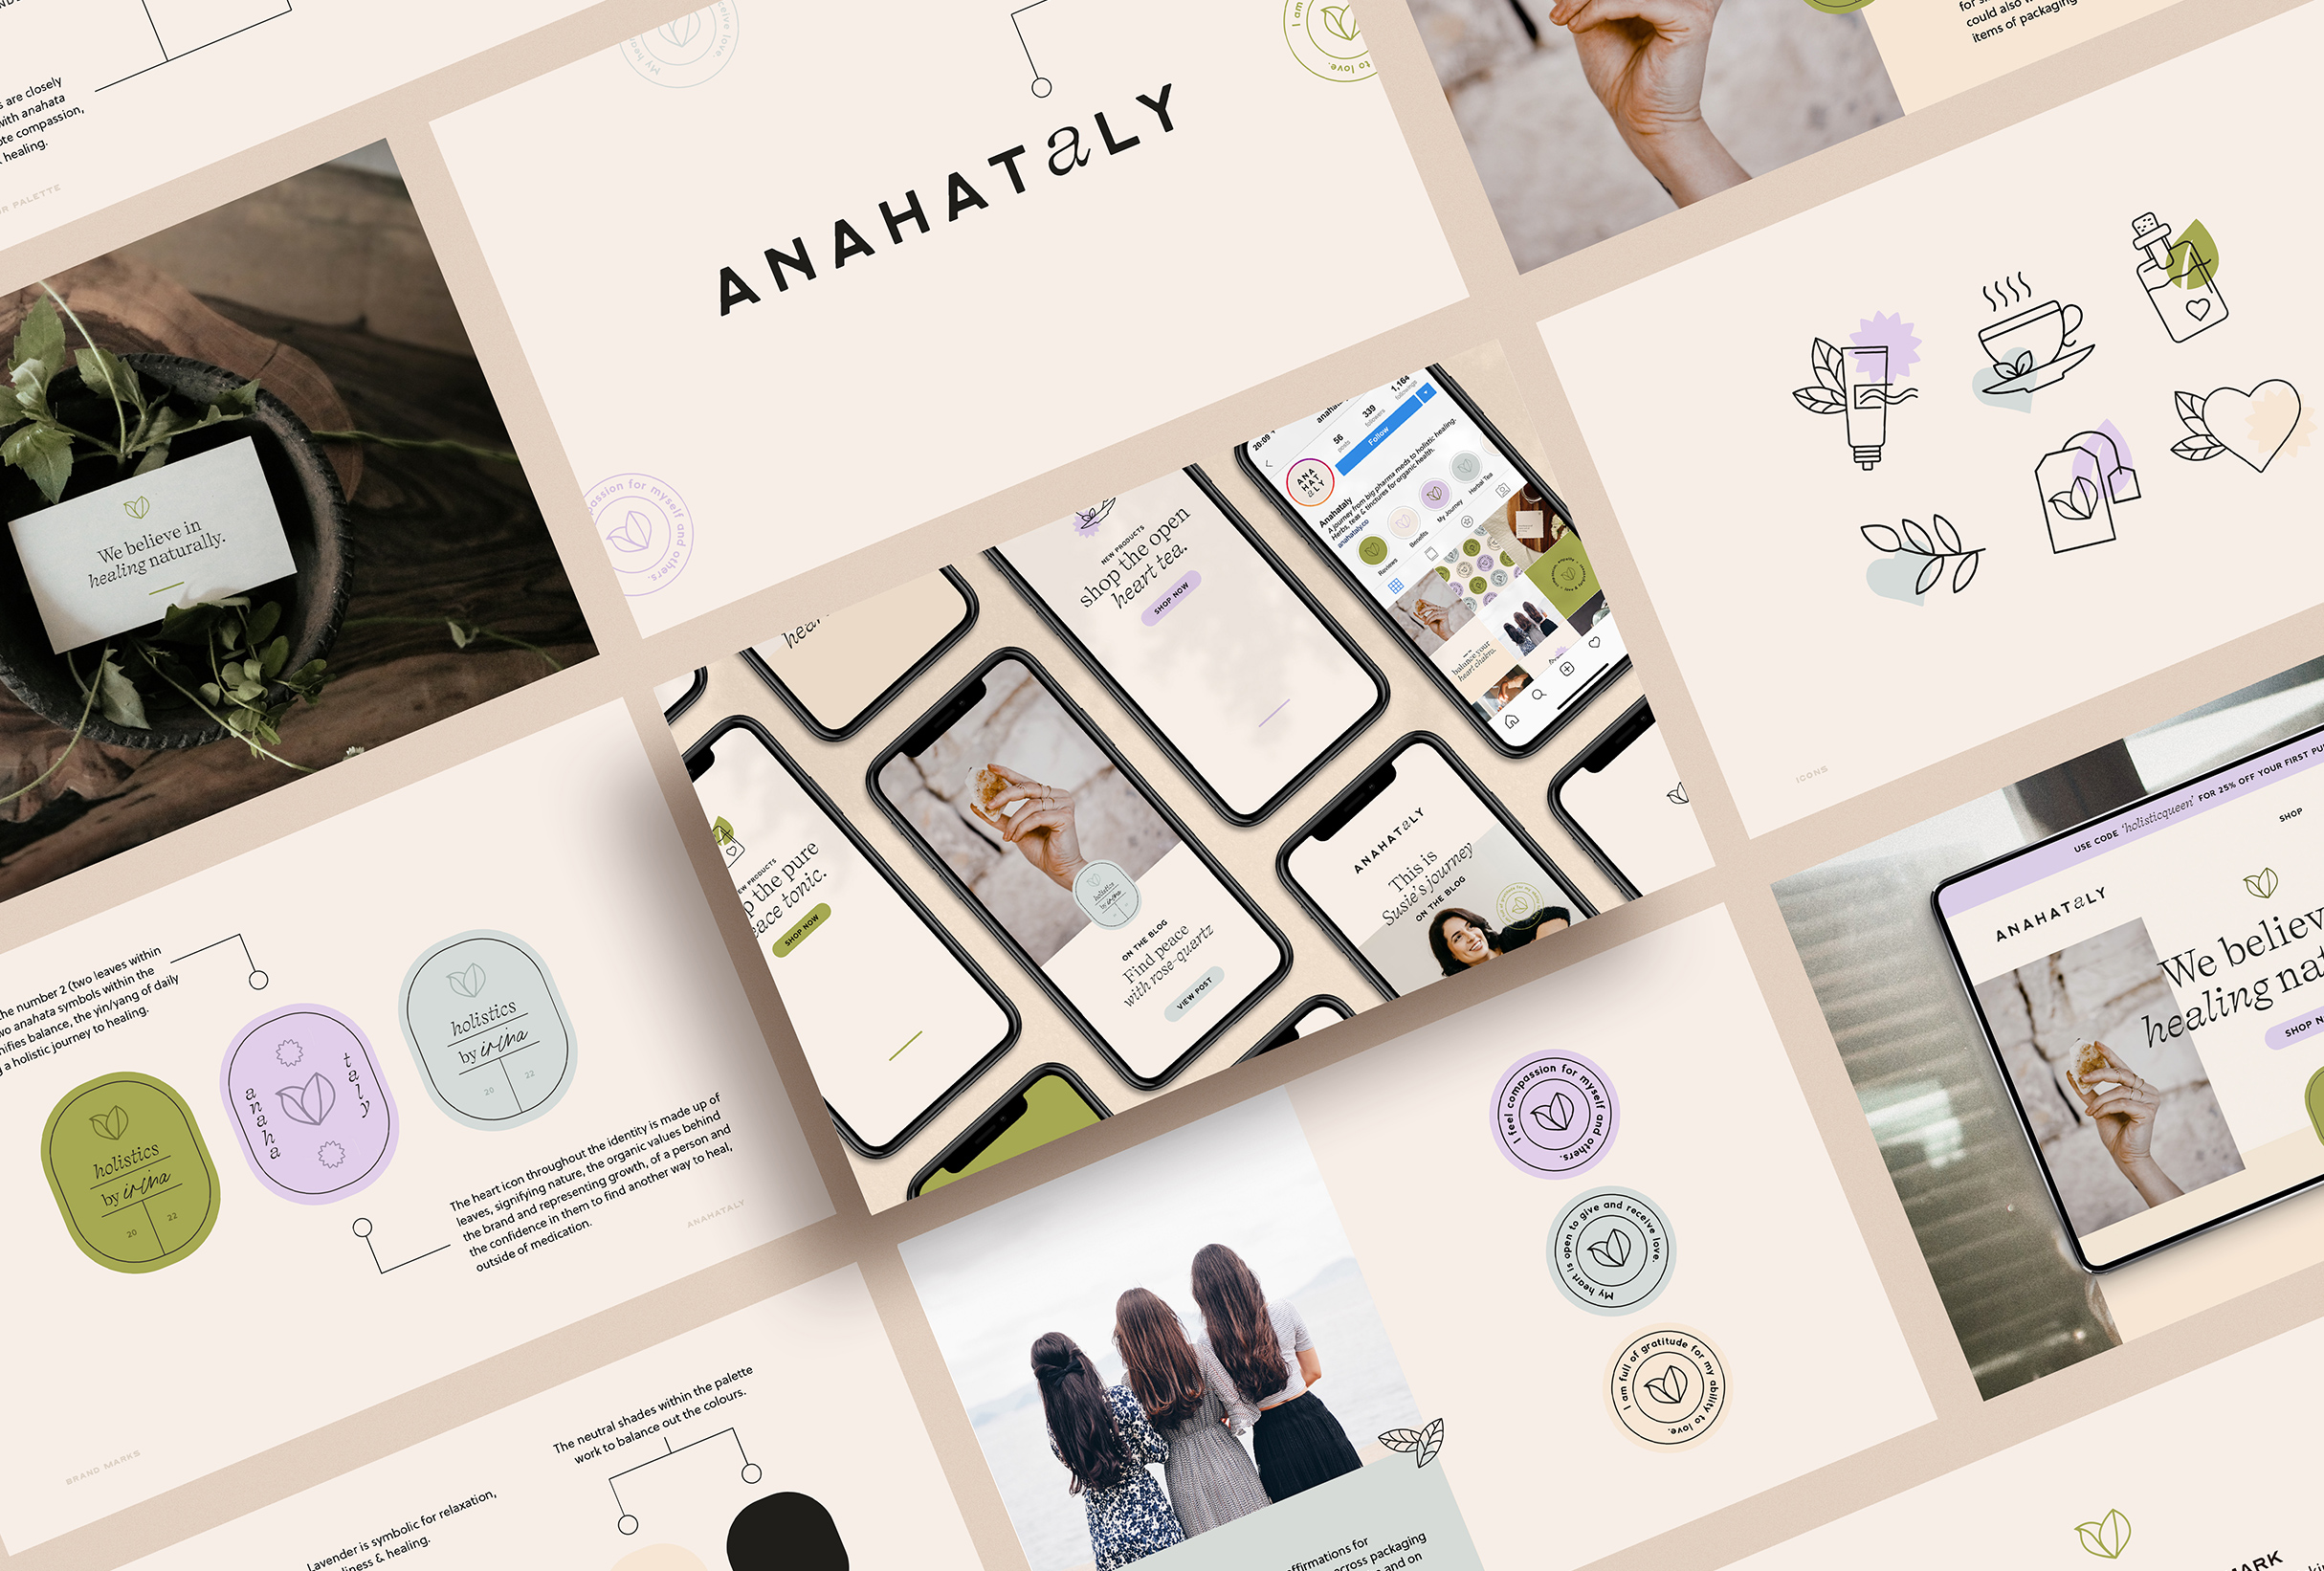 Brand presentation for Anahataly, nourishing herbal products to aid others on their natural journey to optimal health - designed by Wiltshire-based graphic designer, Kaye Huett